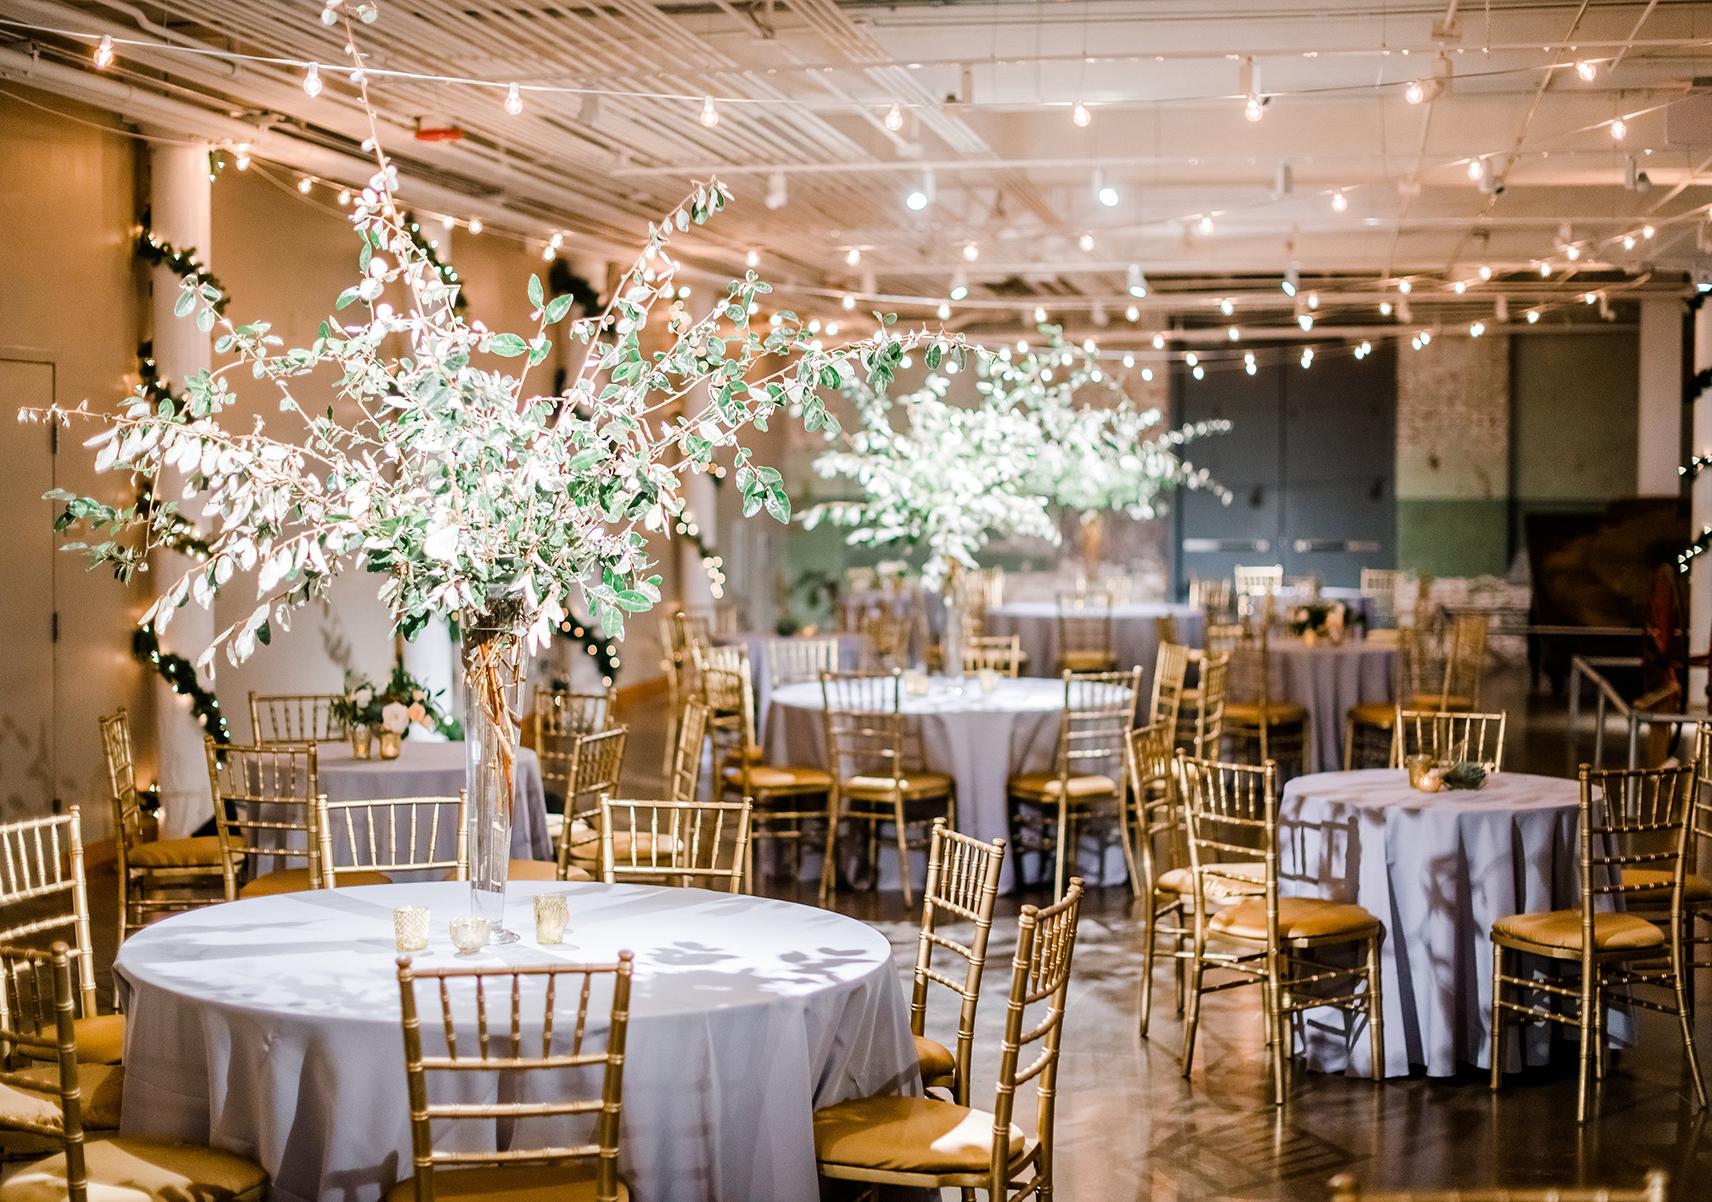 Large space with string lights suspended from ceiling and round tables with silver table cloths, gold chairs and large flower center pieces.